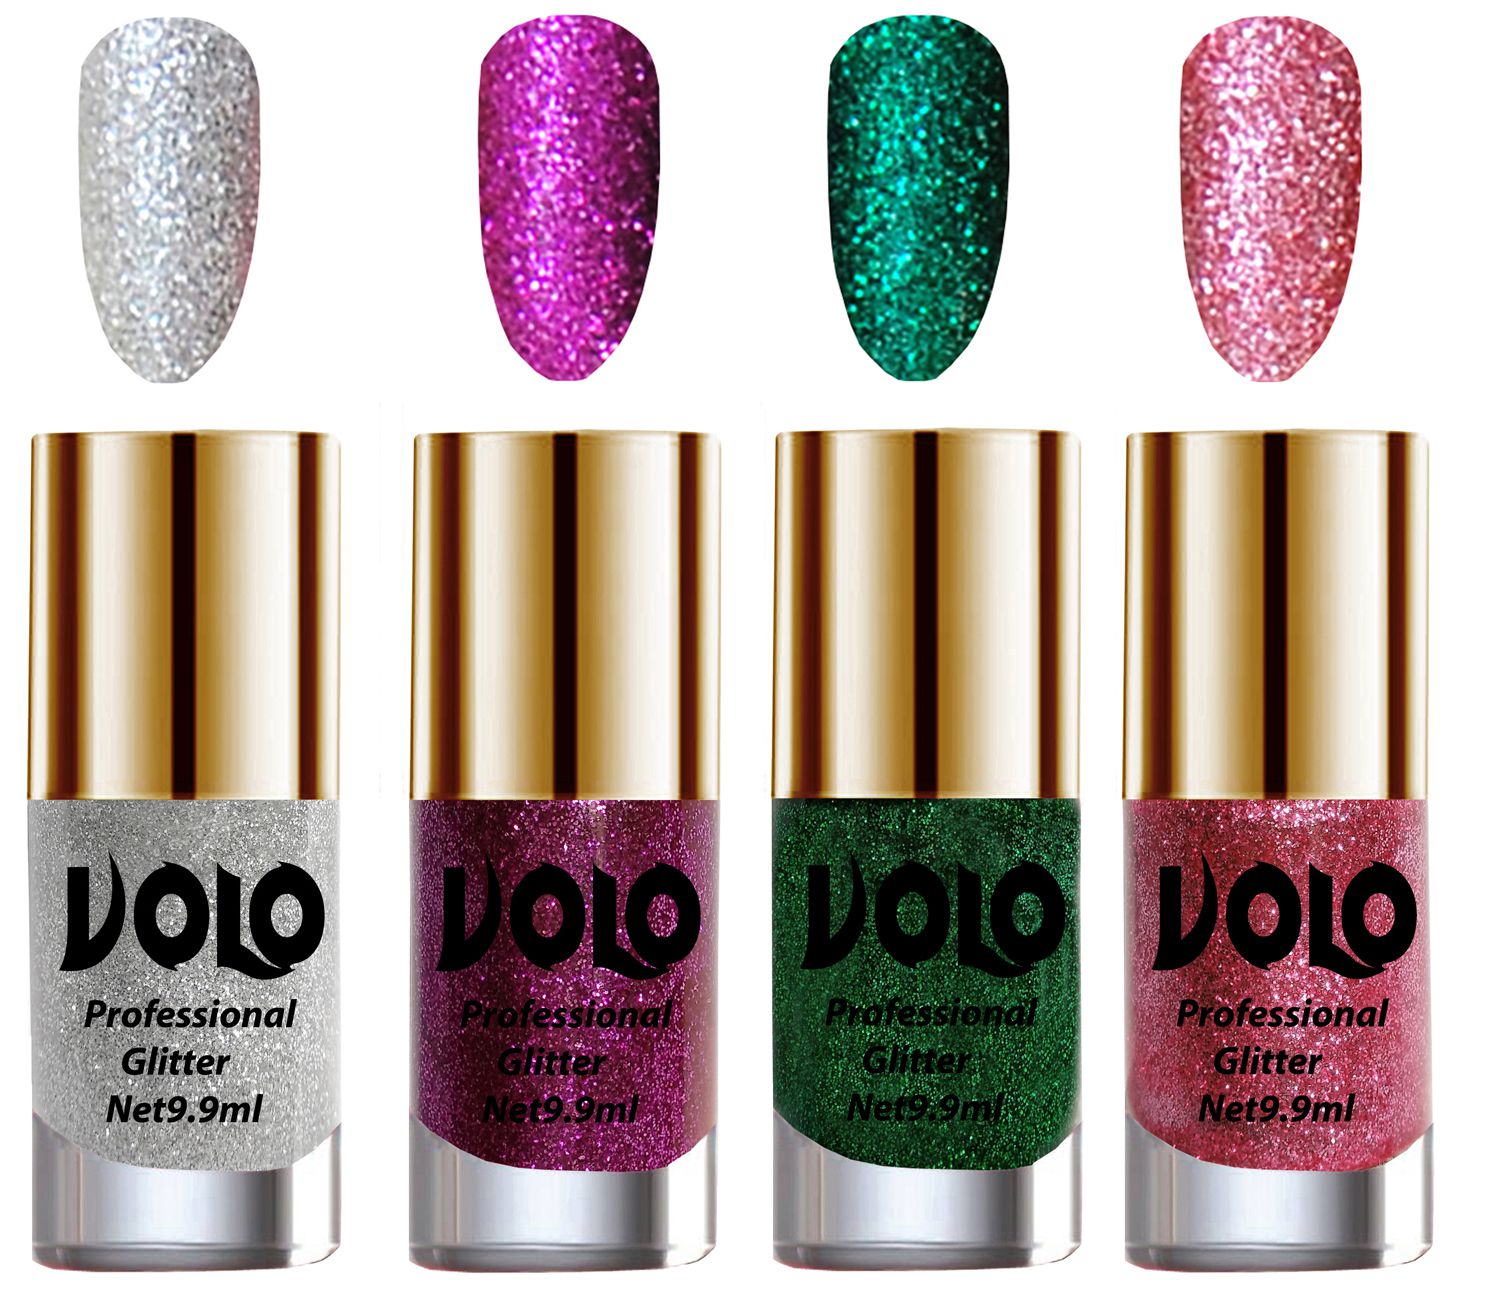     			VOLO Professionally Used Glitter Shine Nail Polish Silver,Purple,Green Pink Pack of 4 39 mL